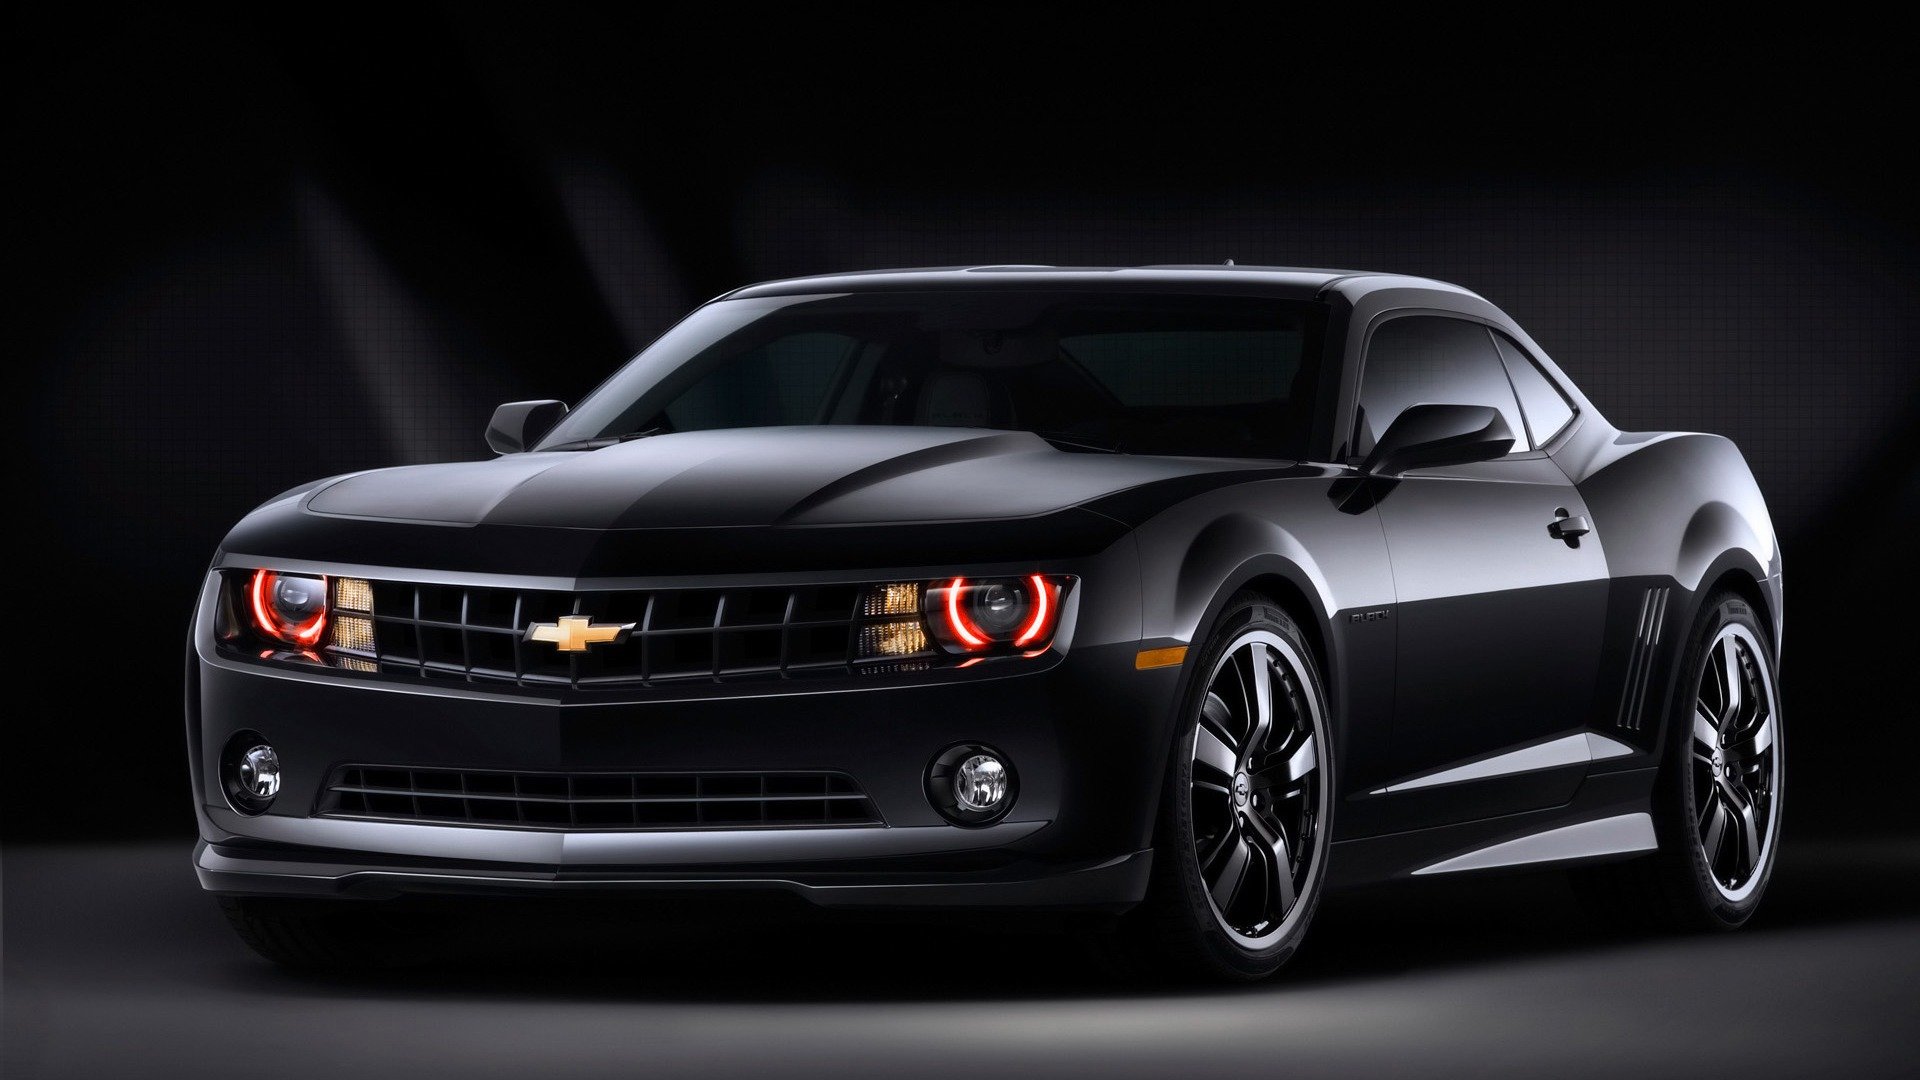 Best Chevrolet Camaro background ID:464499 for High Resolution hd 1920x1080 computer